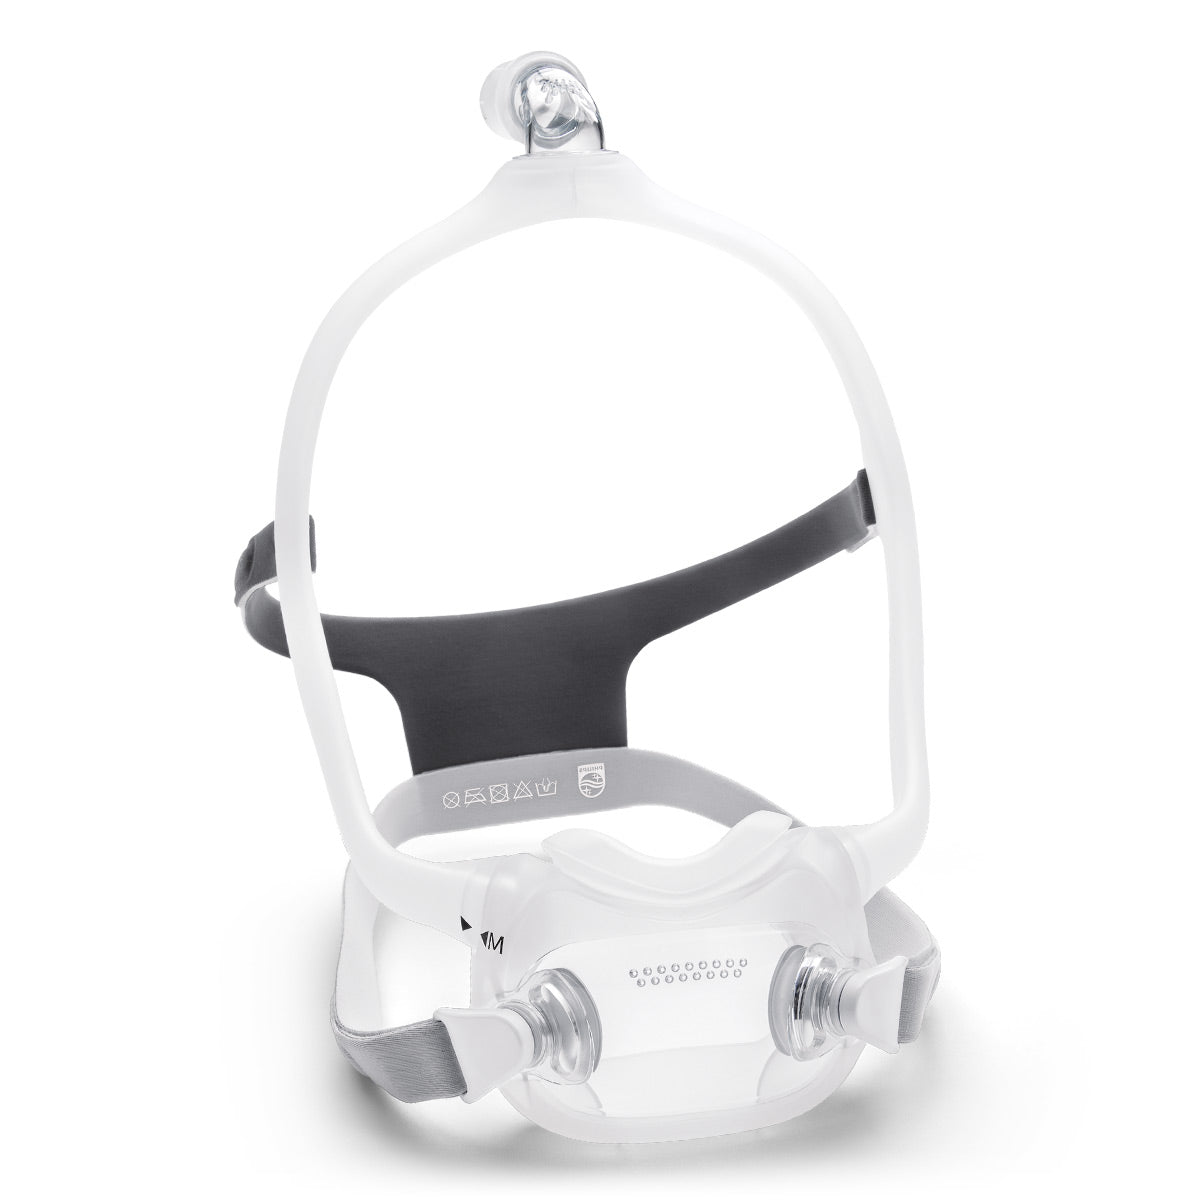 DreamWear Full Face CPAP/BiPAP Mask FitPack with Headgear